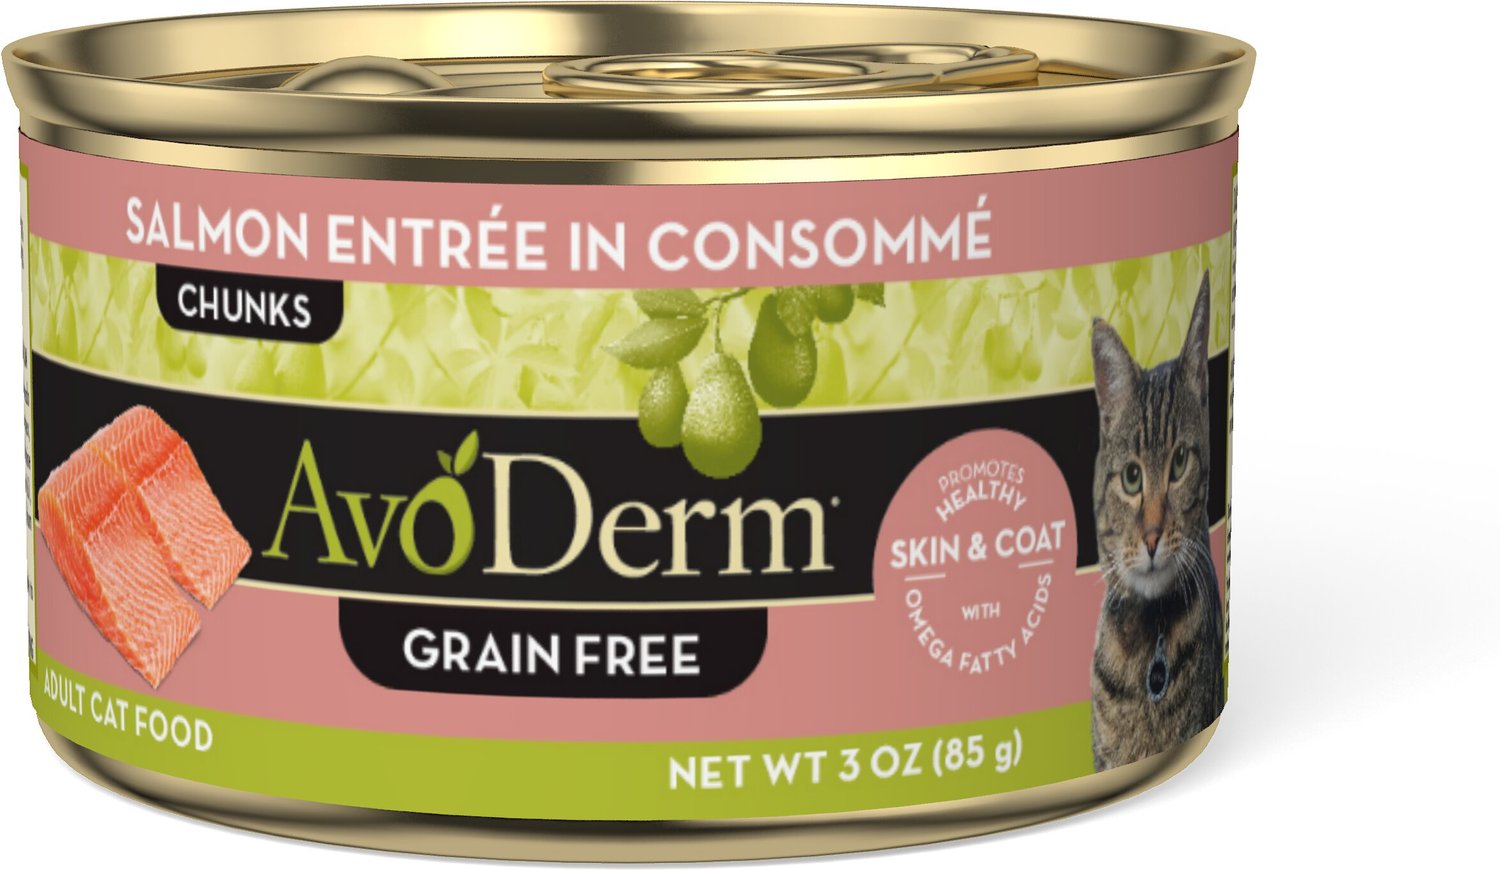 AVODERM GrainFree Salmon Entree Salmon Consomme Canned Cat Food, 3oz